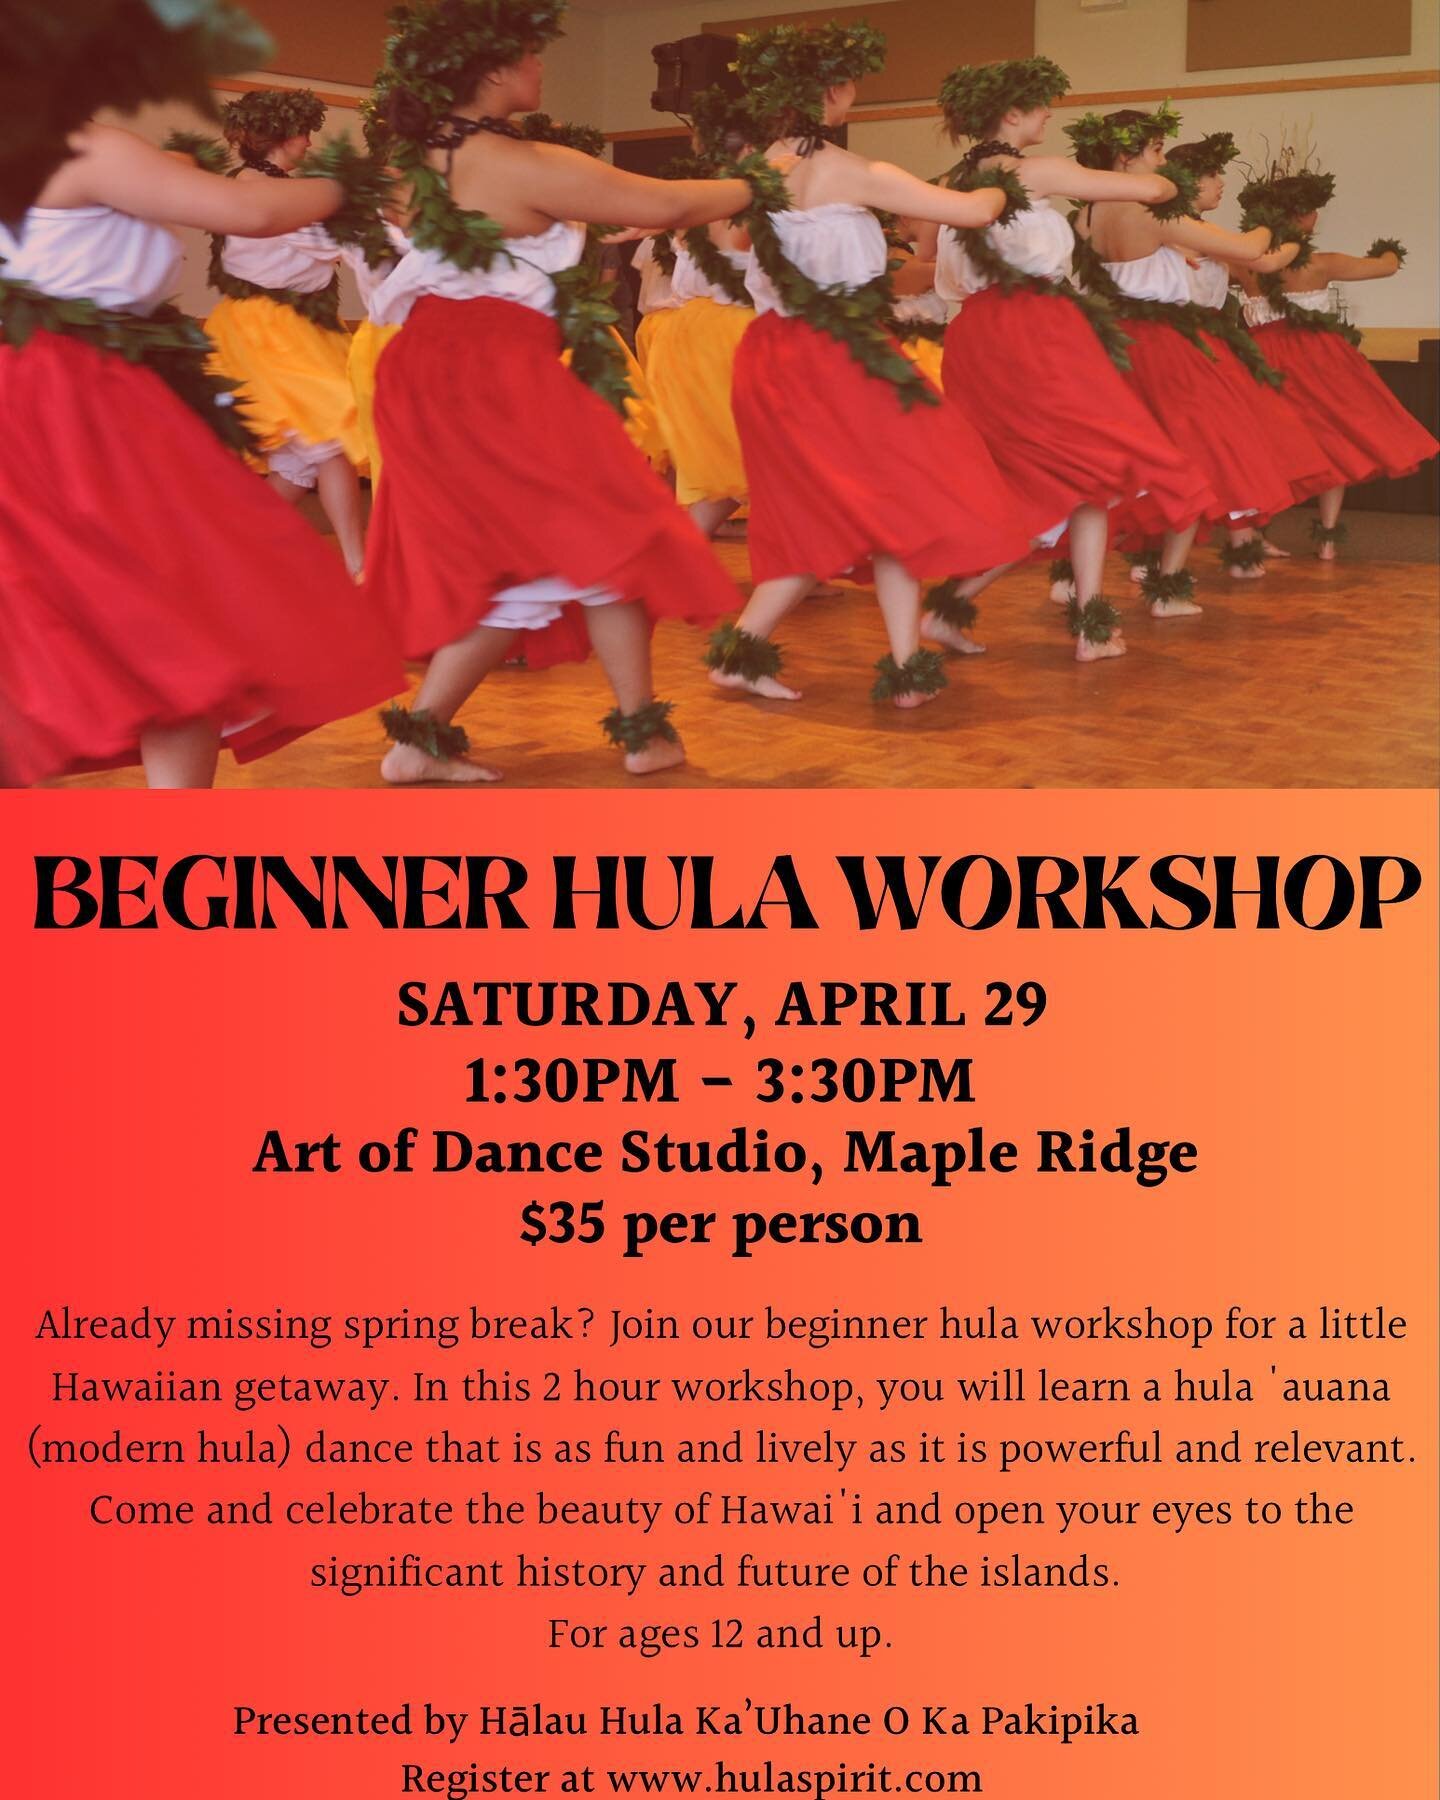 Looking to try something different? We're holding a couple of hula workshops in April. Kane (men's) hula on April 16 and Ho'omaka (beginners) workshop on April 29. 

Check our stories or website to register 🤙🏽
.
.
.
.
.
.
.
#hula #haumana #hawaiian